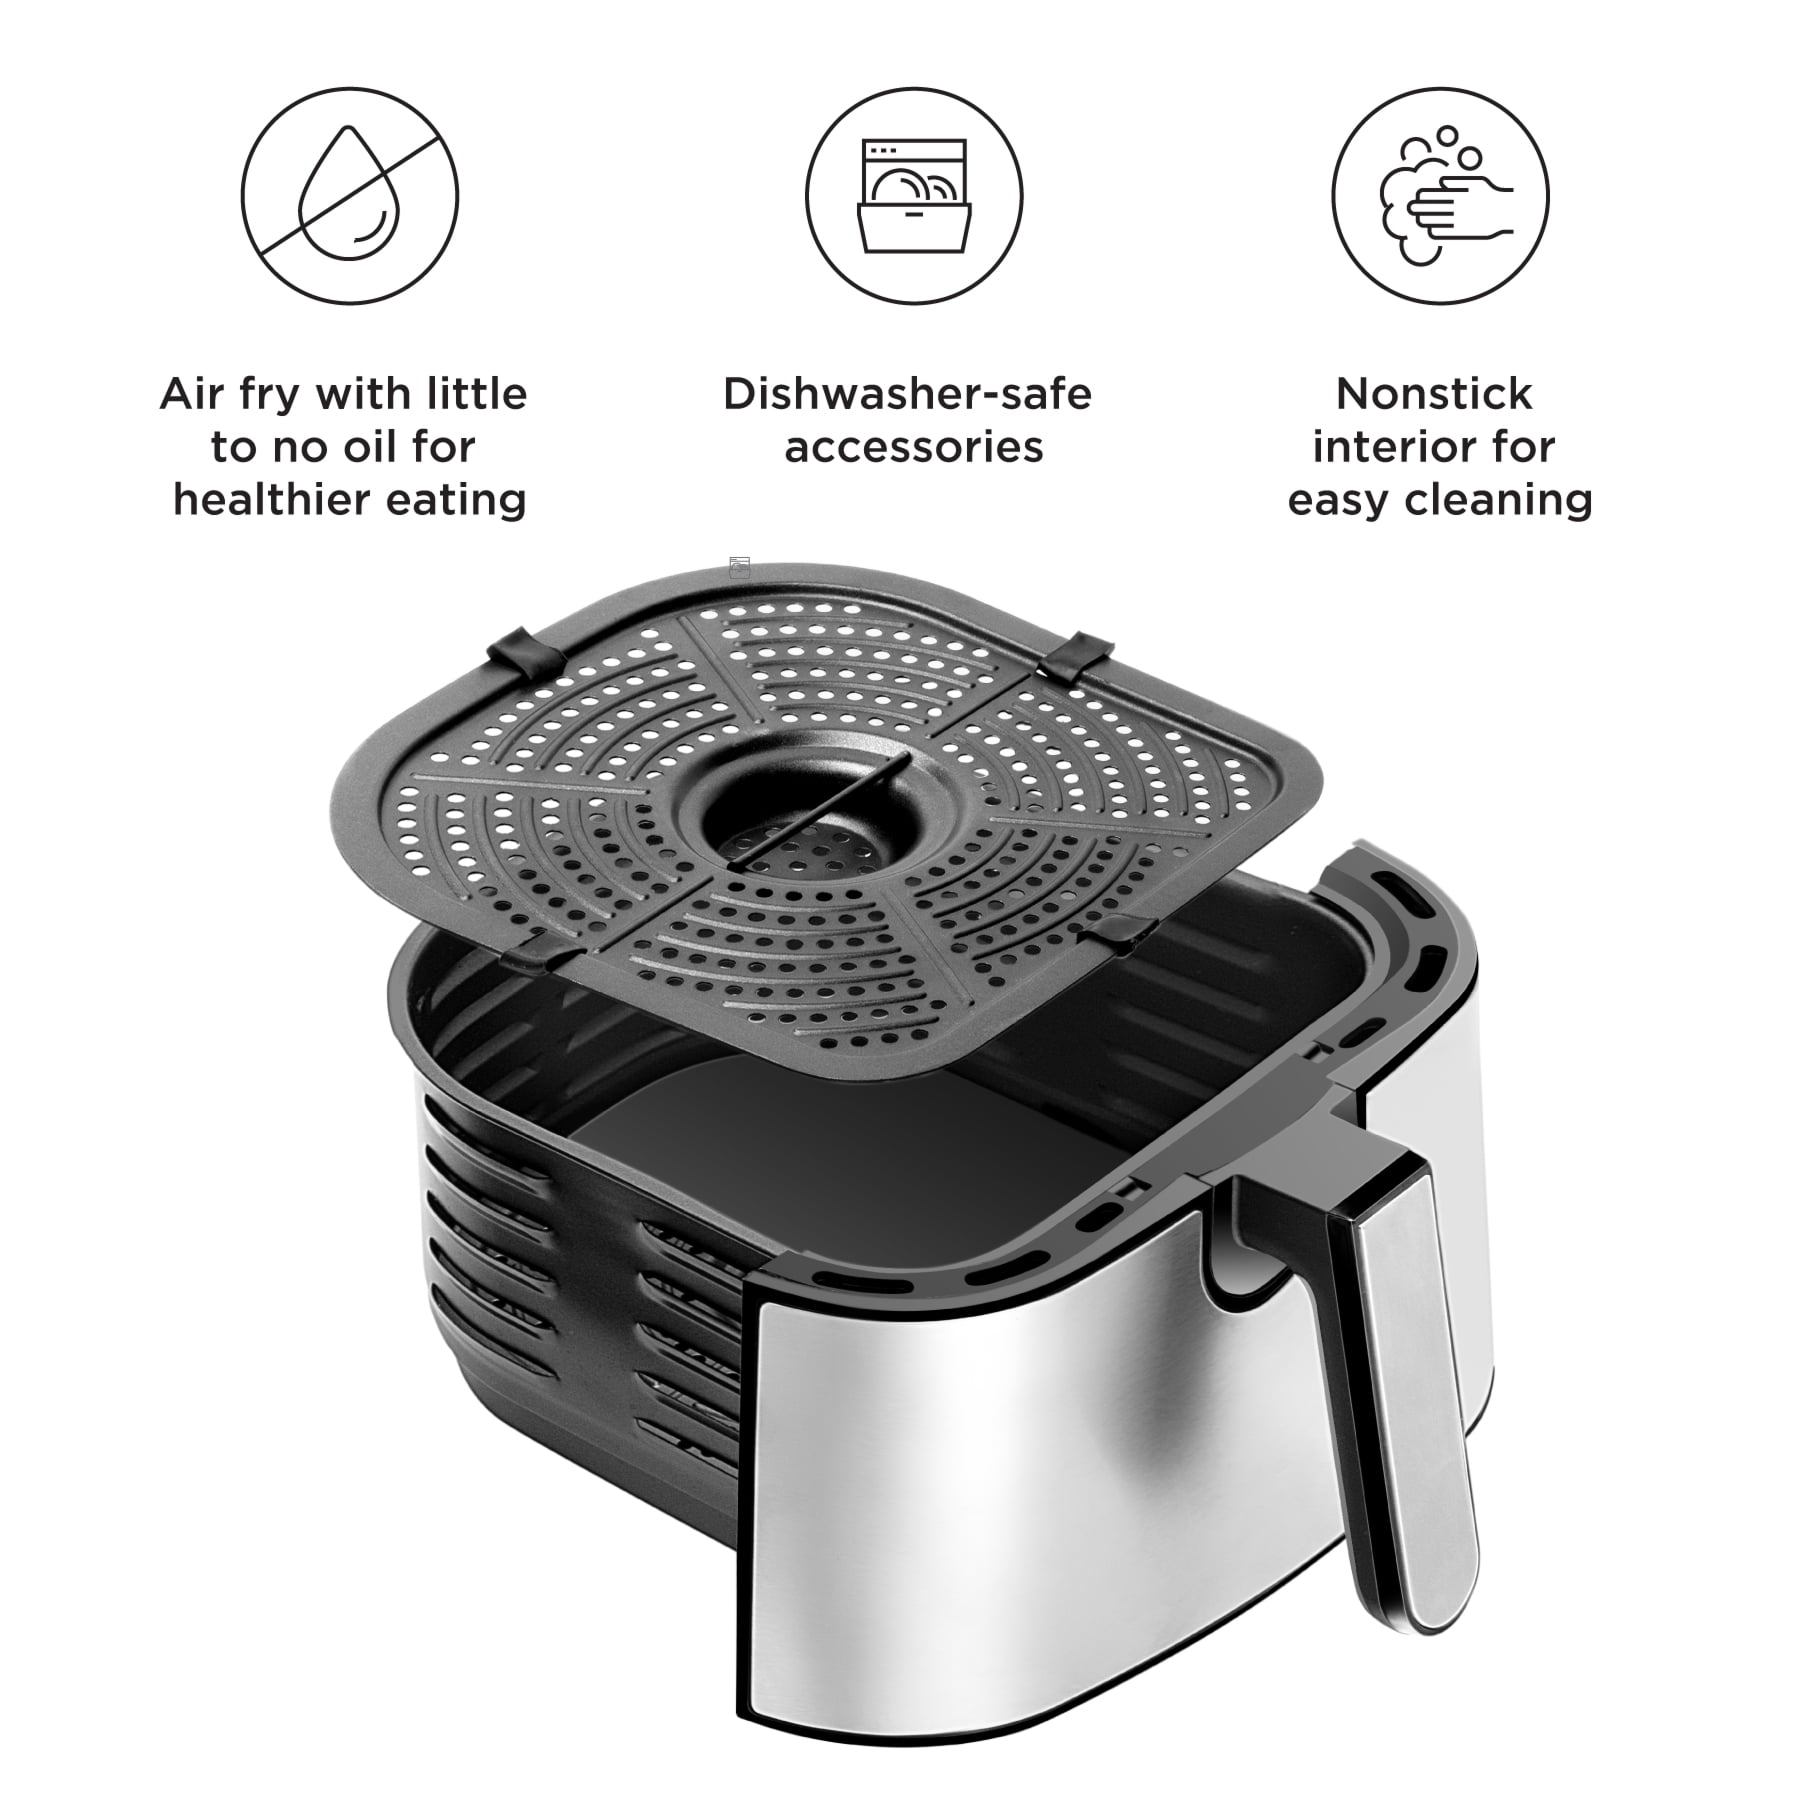 Can An Air Fryer Basket Go In The Dishwasher? - Kitchen Seer